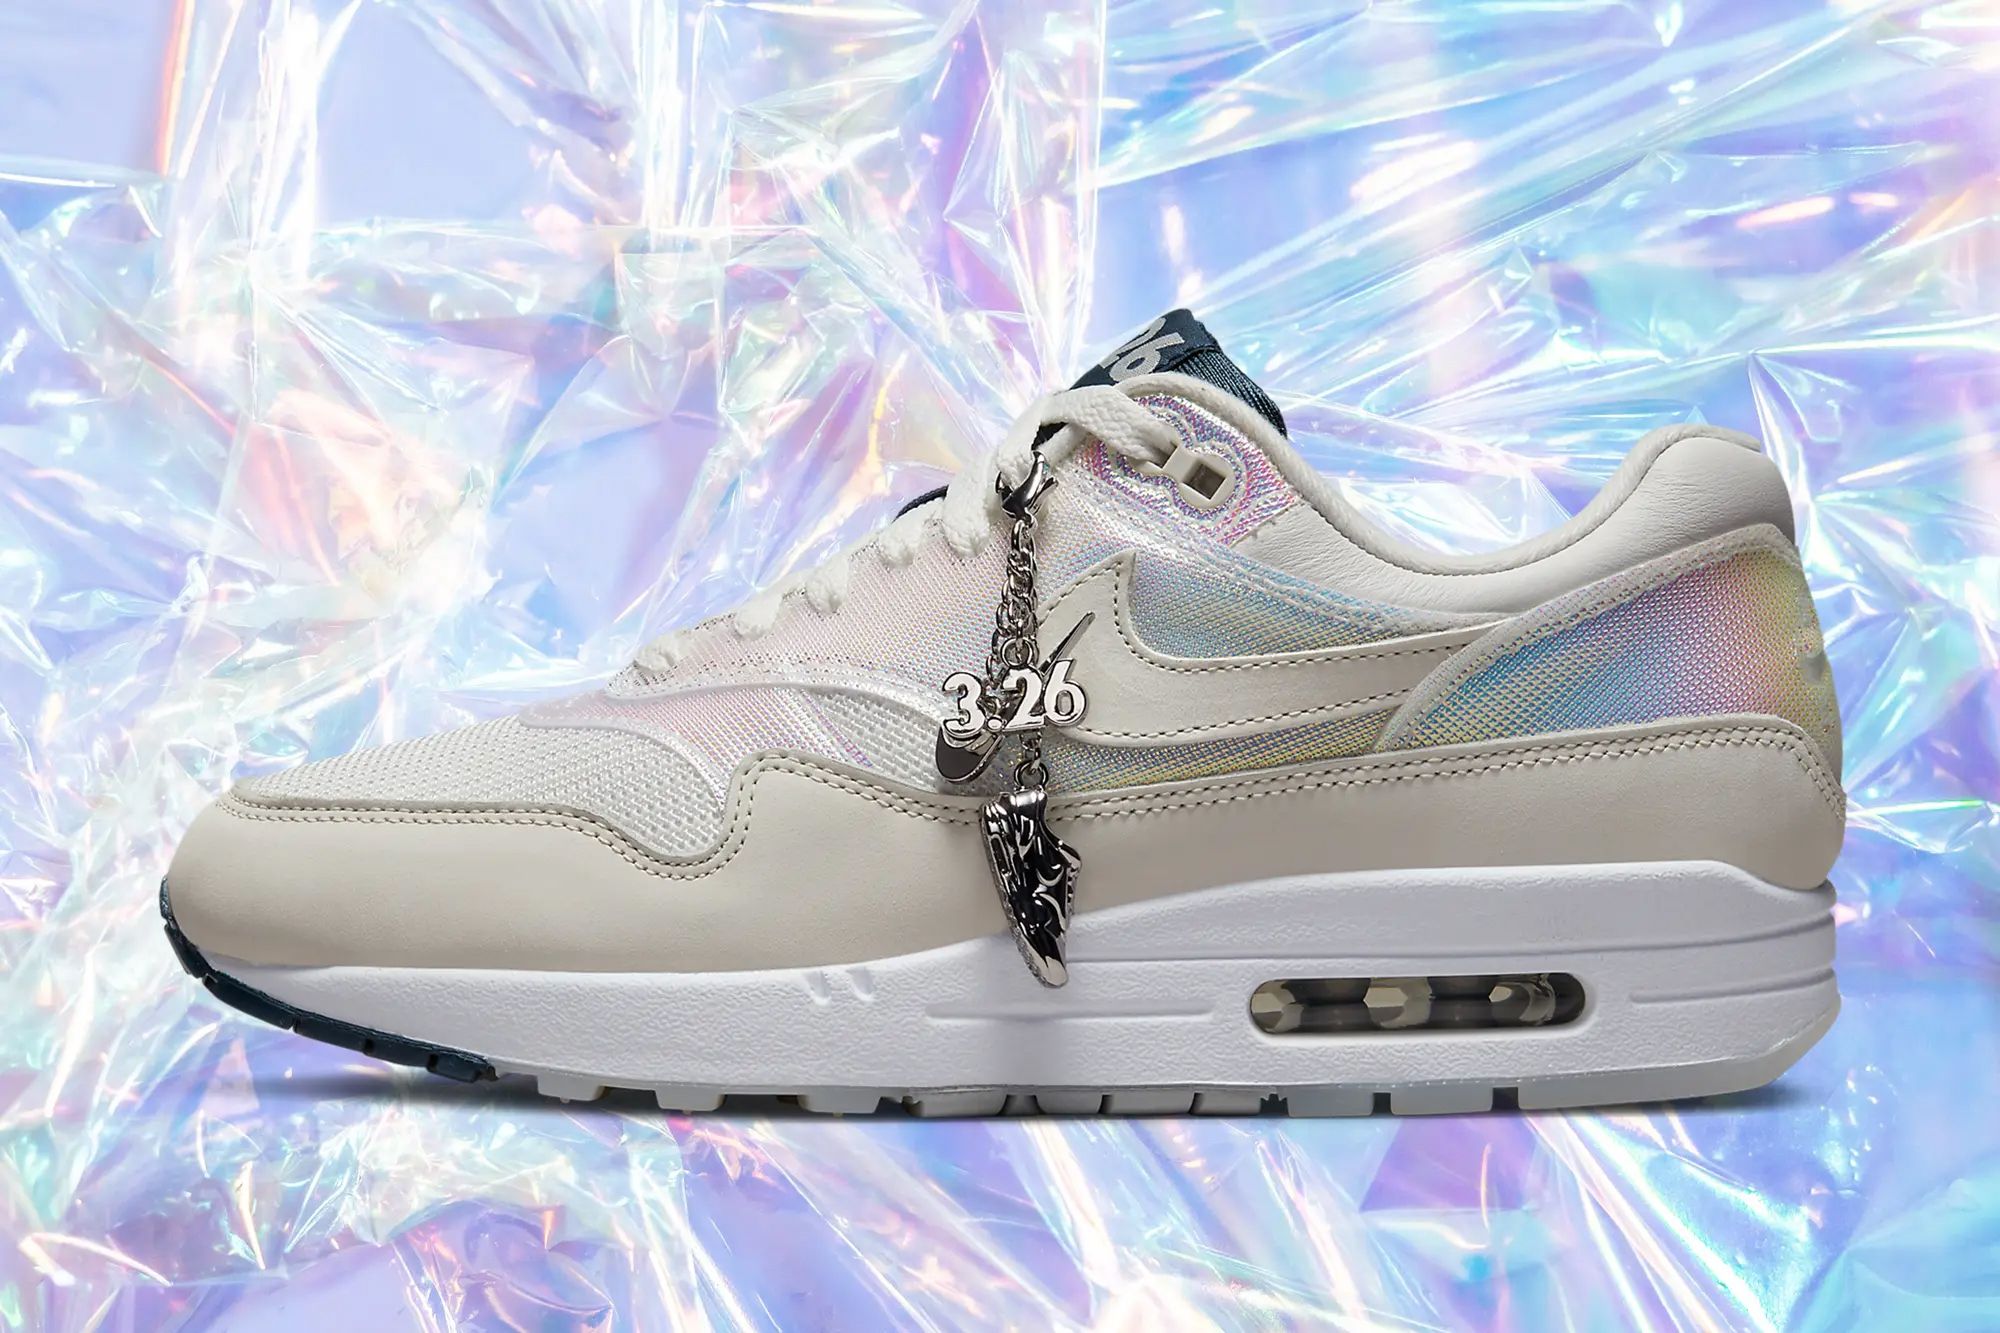 What We'd Like to See From Air Max Day